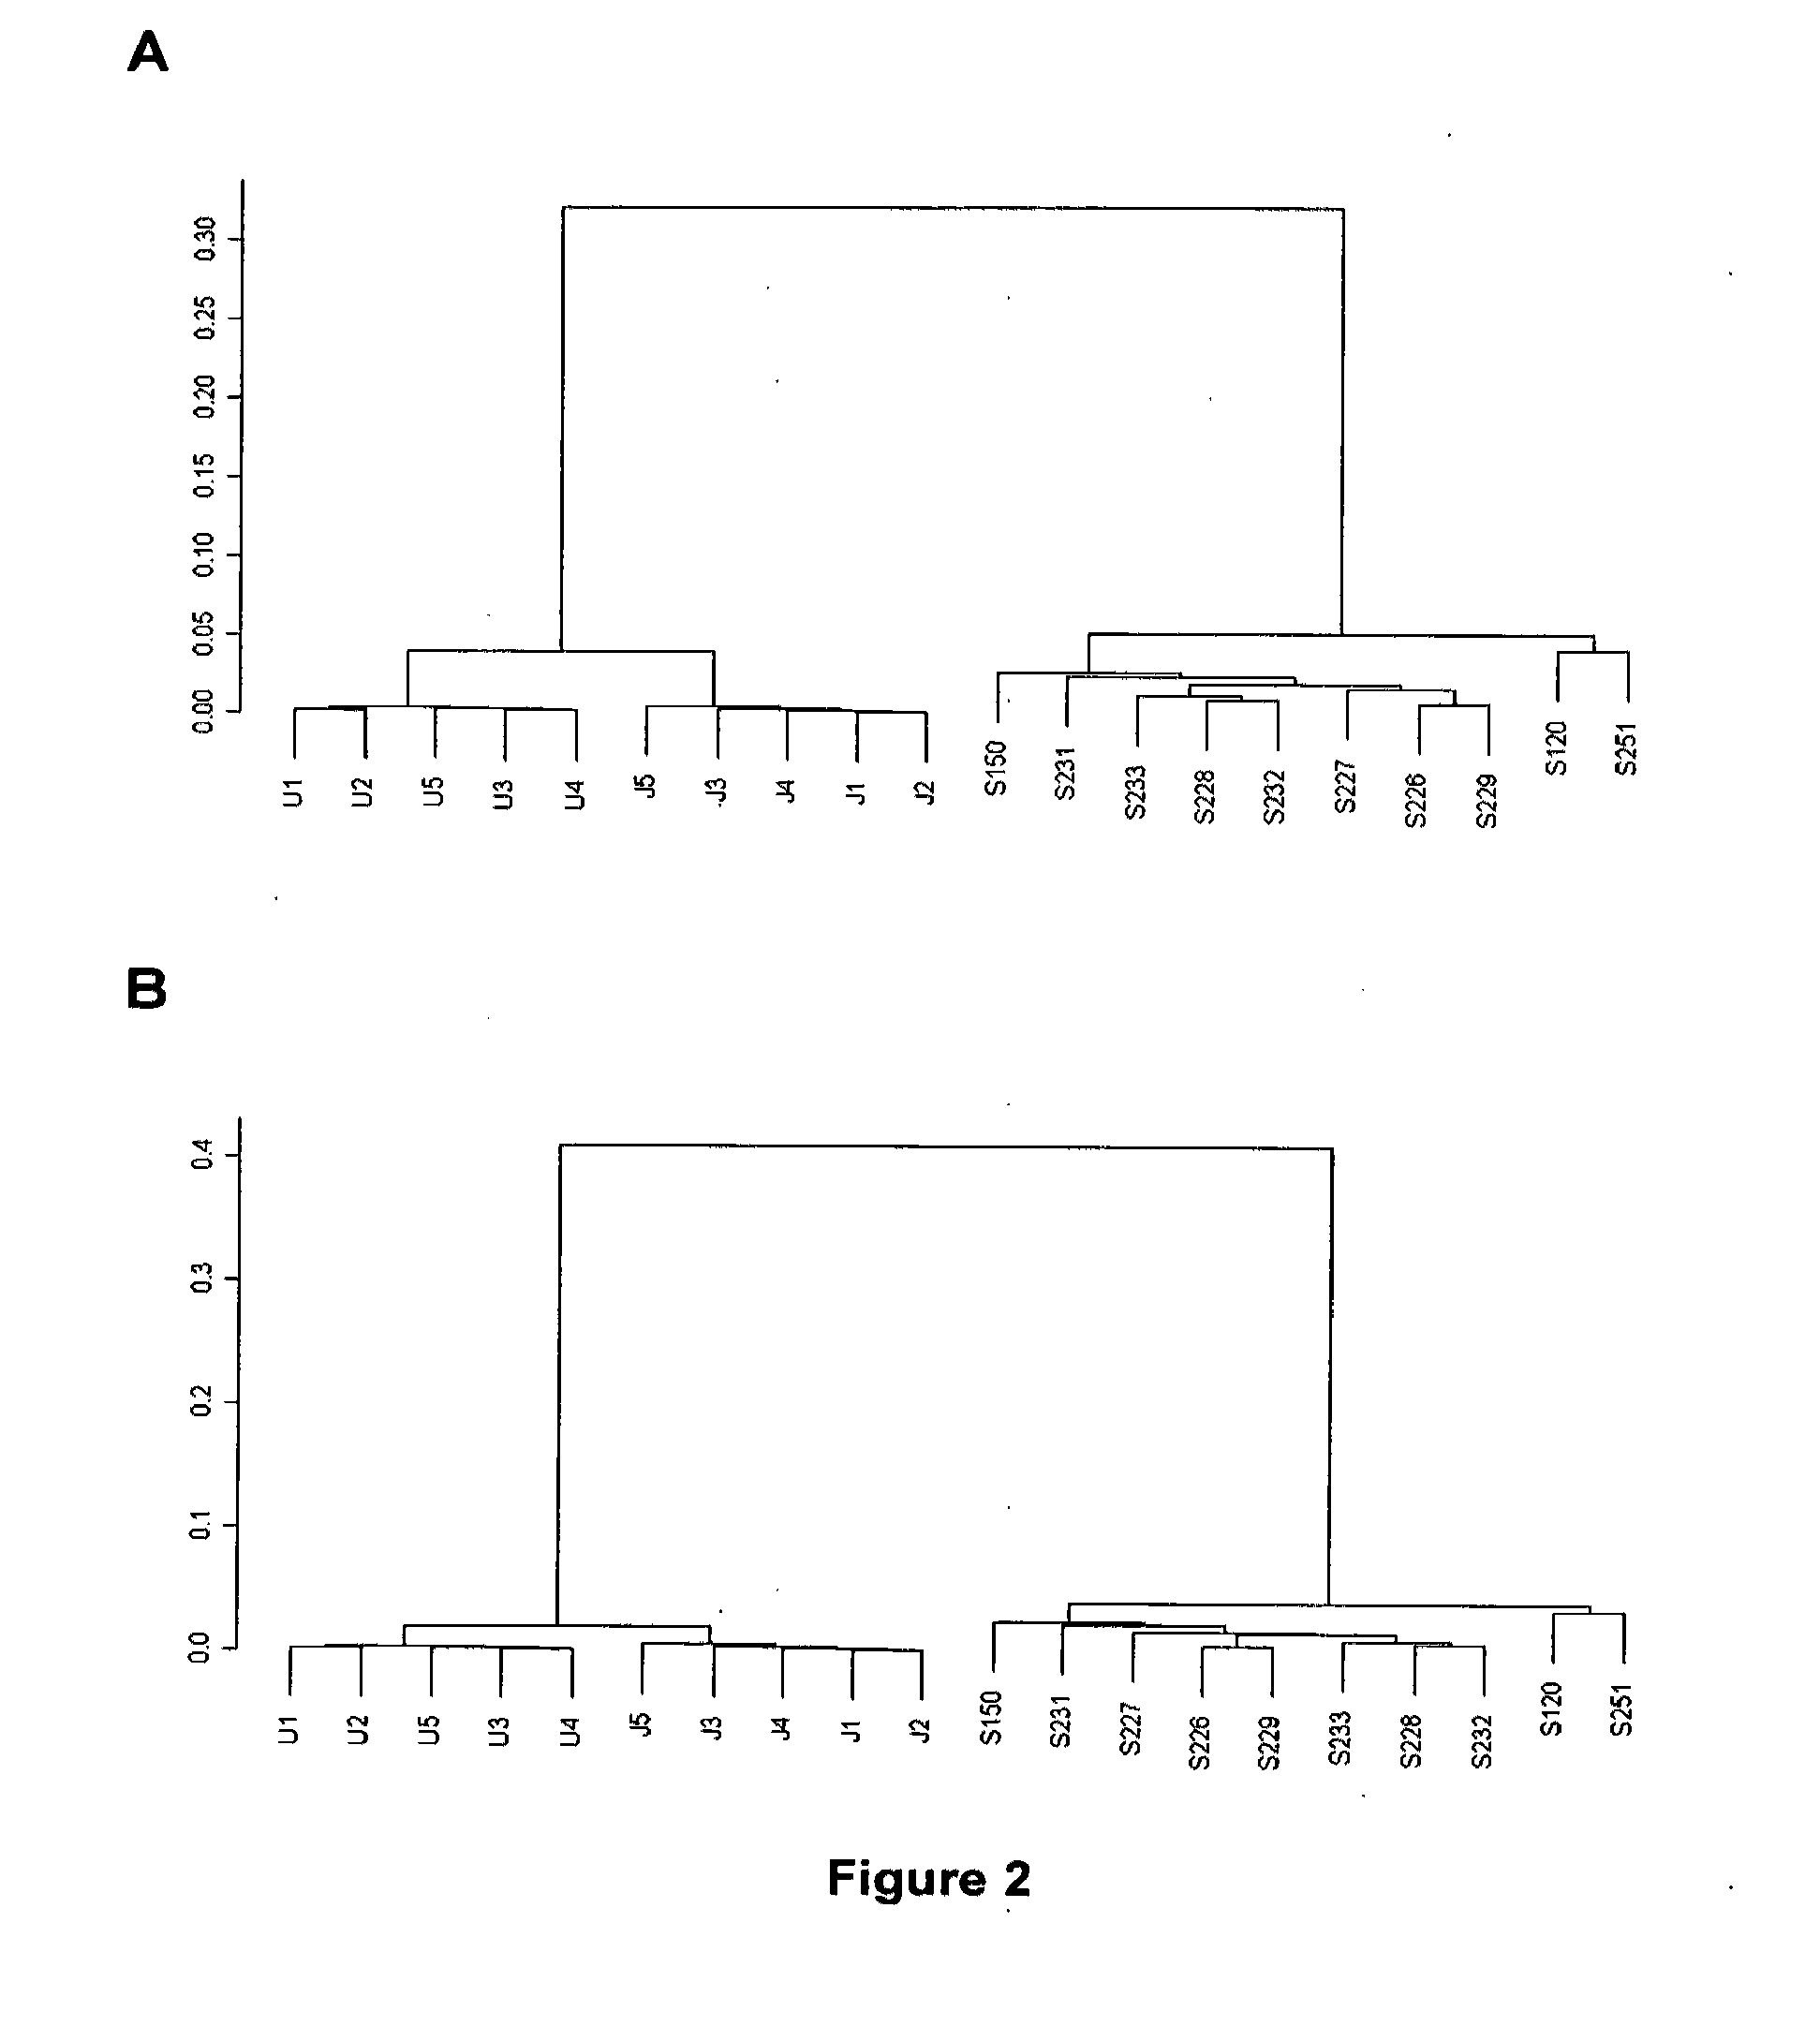 Method and Device for the in Vitro Analysis for MRNA of Genes Involved in Haematological Neoplasias